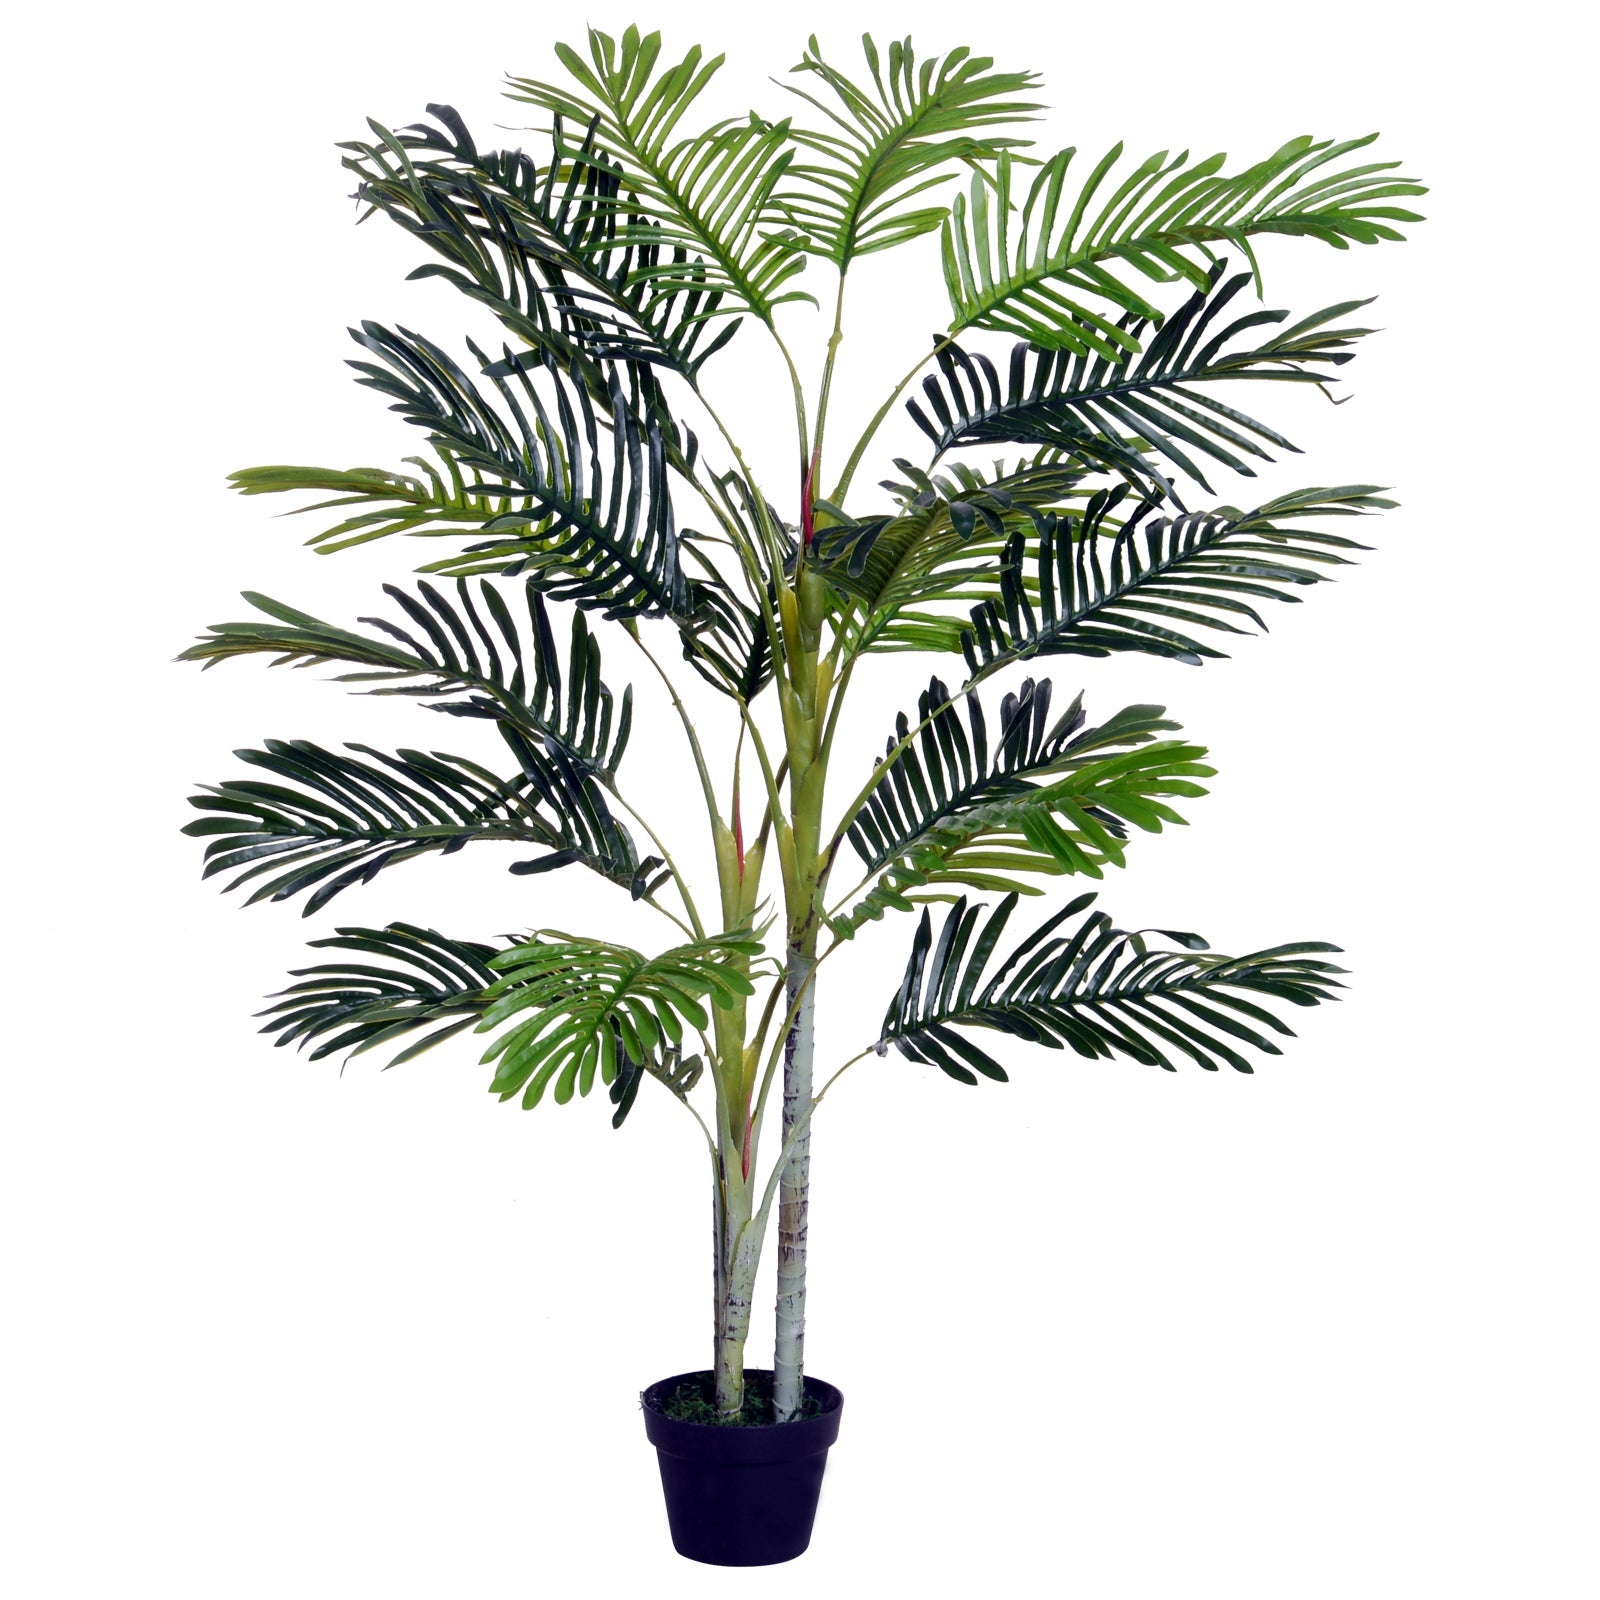 150cm(5ft) Artificial Palm Tree Decorative Indoor Faux Green Plant w/Leaves Home Décor Tropical Potted Home Office-0